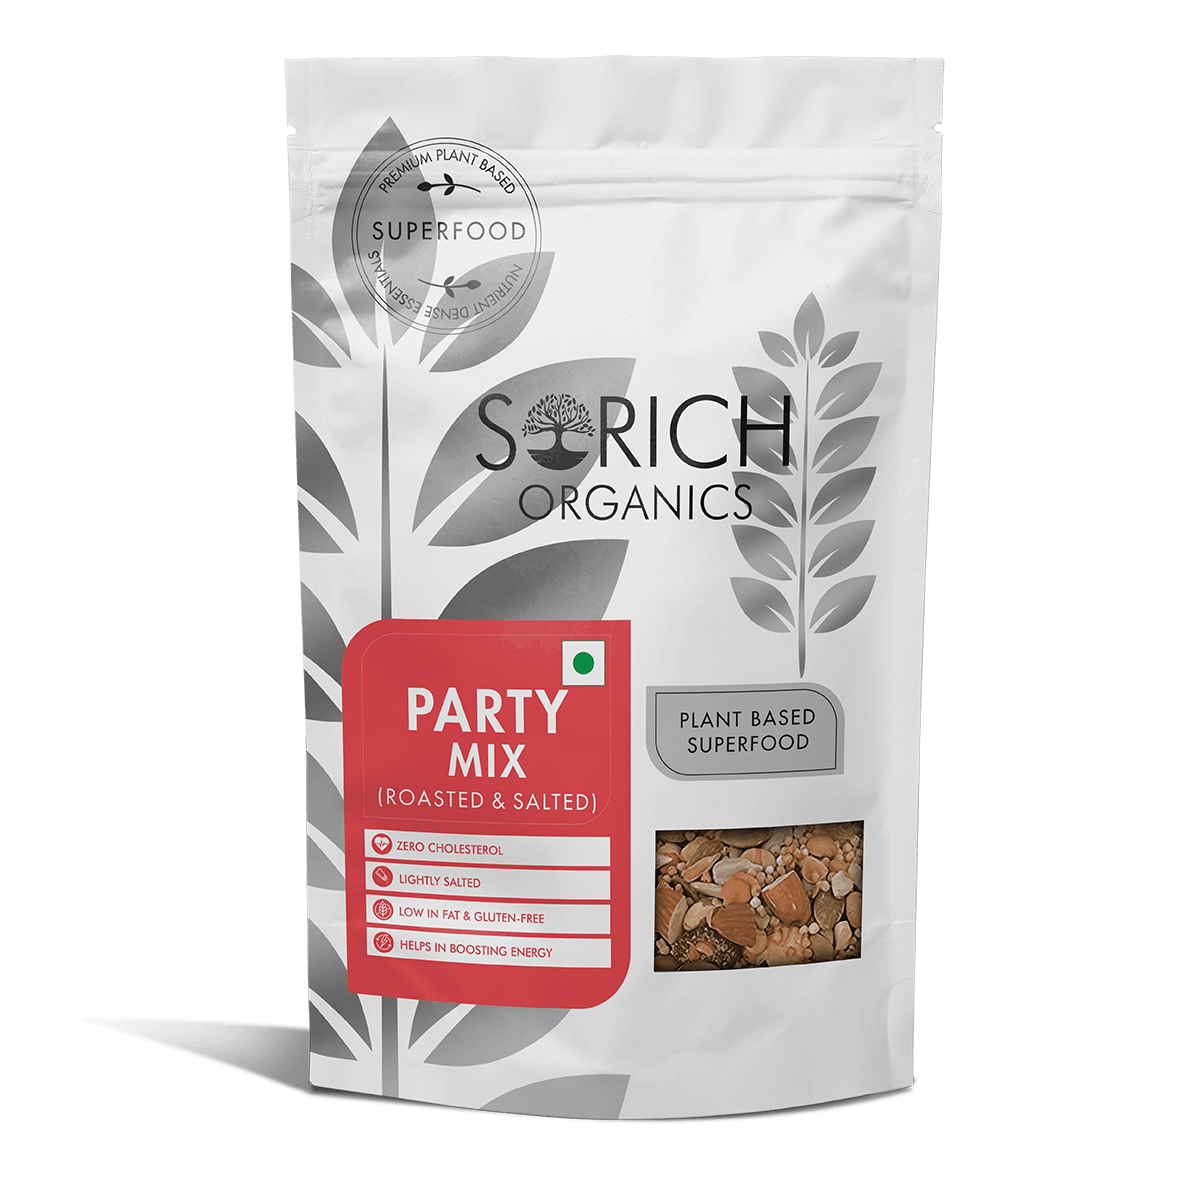 Buy Sorich Organics Party Mix Roasted  Salted Online at Best Price  Sorich Organics — Sorichorganics